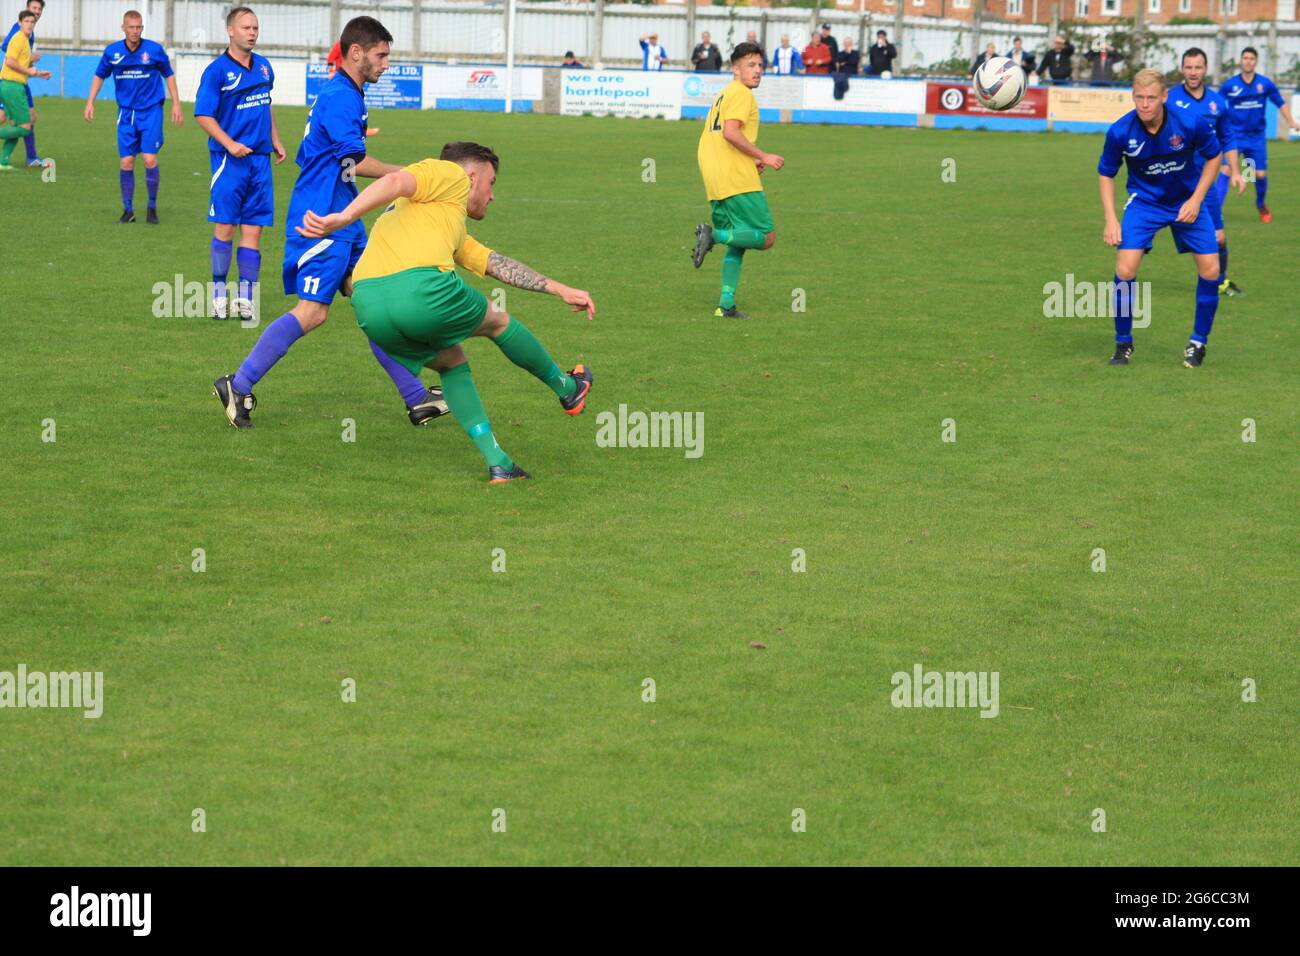 Local football match between Billingham and Stockton in north east England,UK. Defender clears ball upfield. Stock Photo